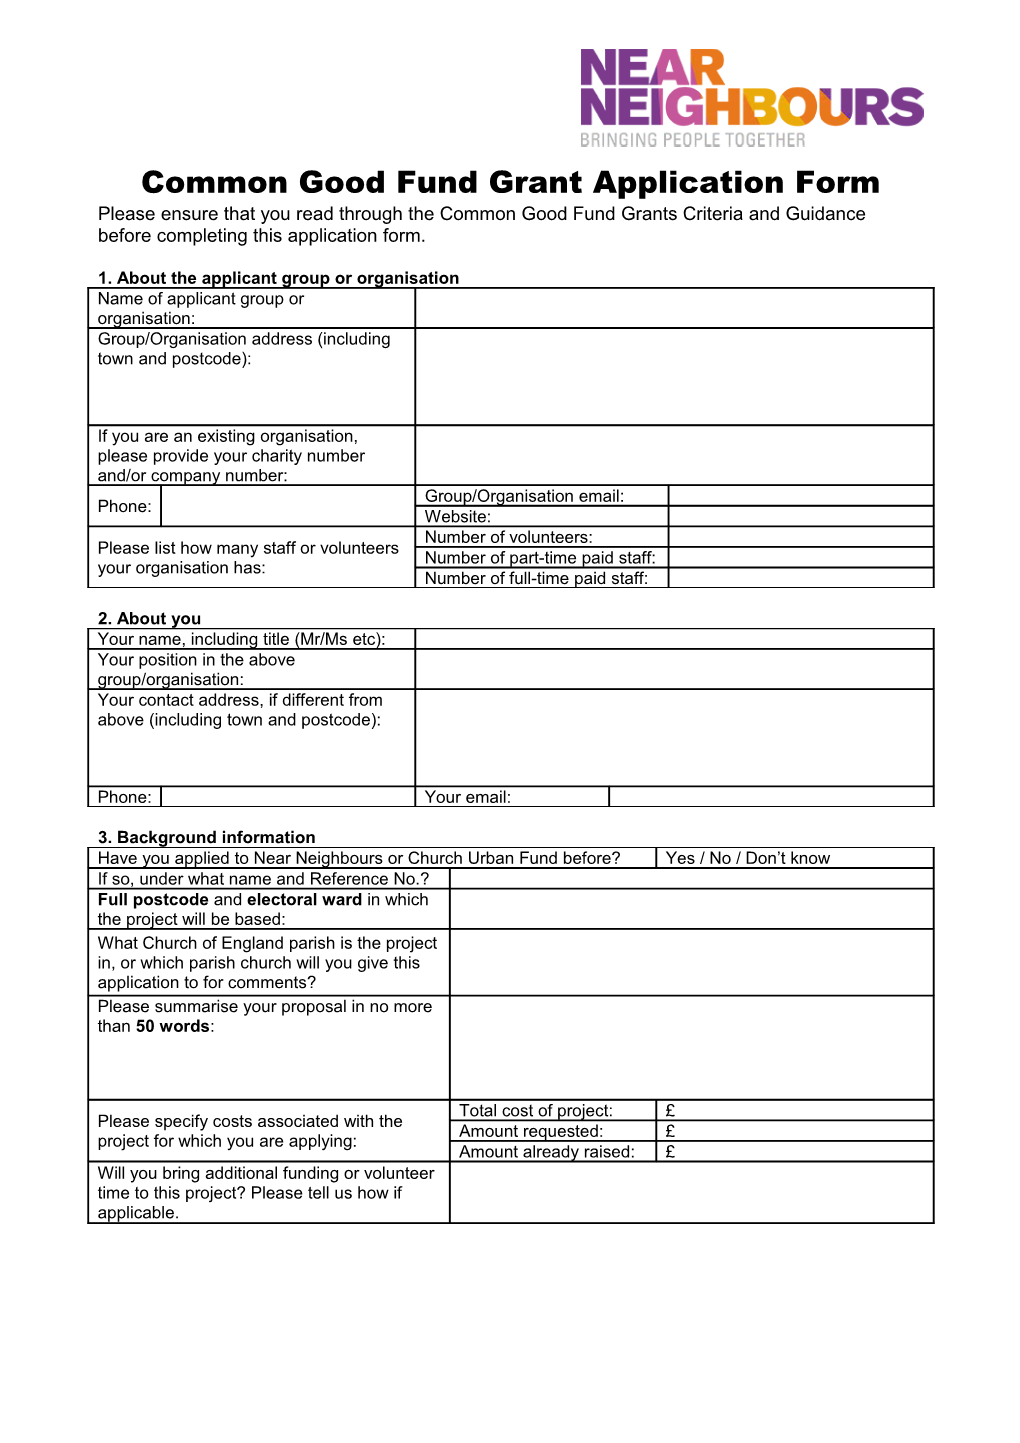 Common Good Fund Grant Application Form